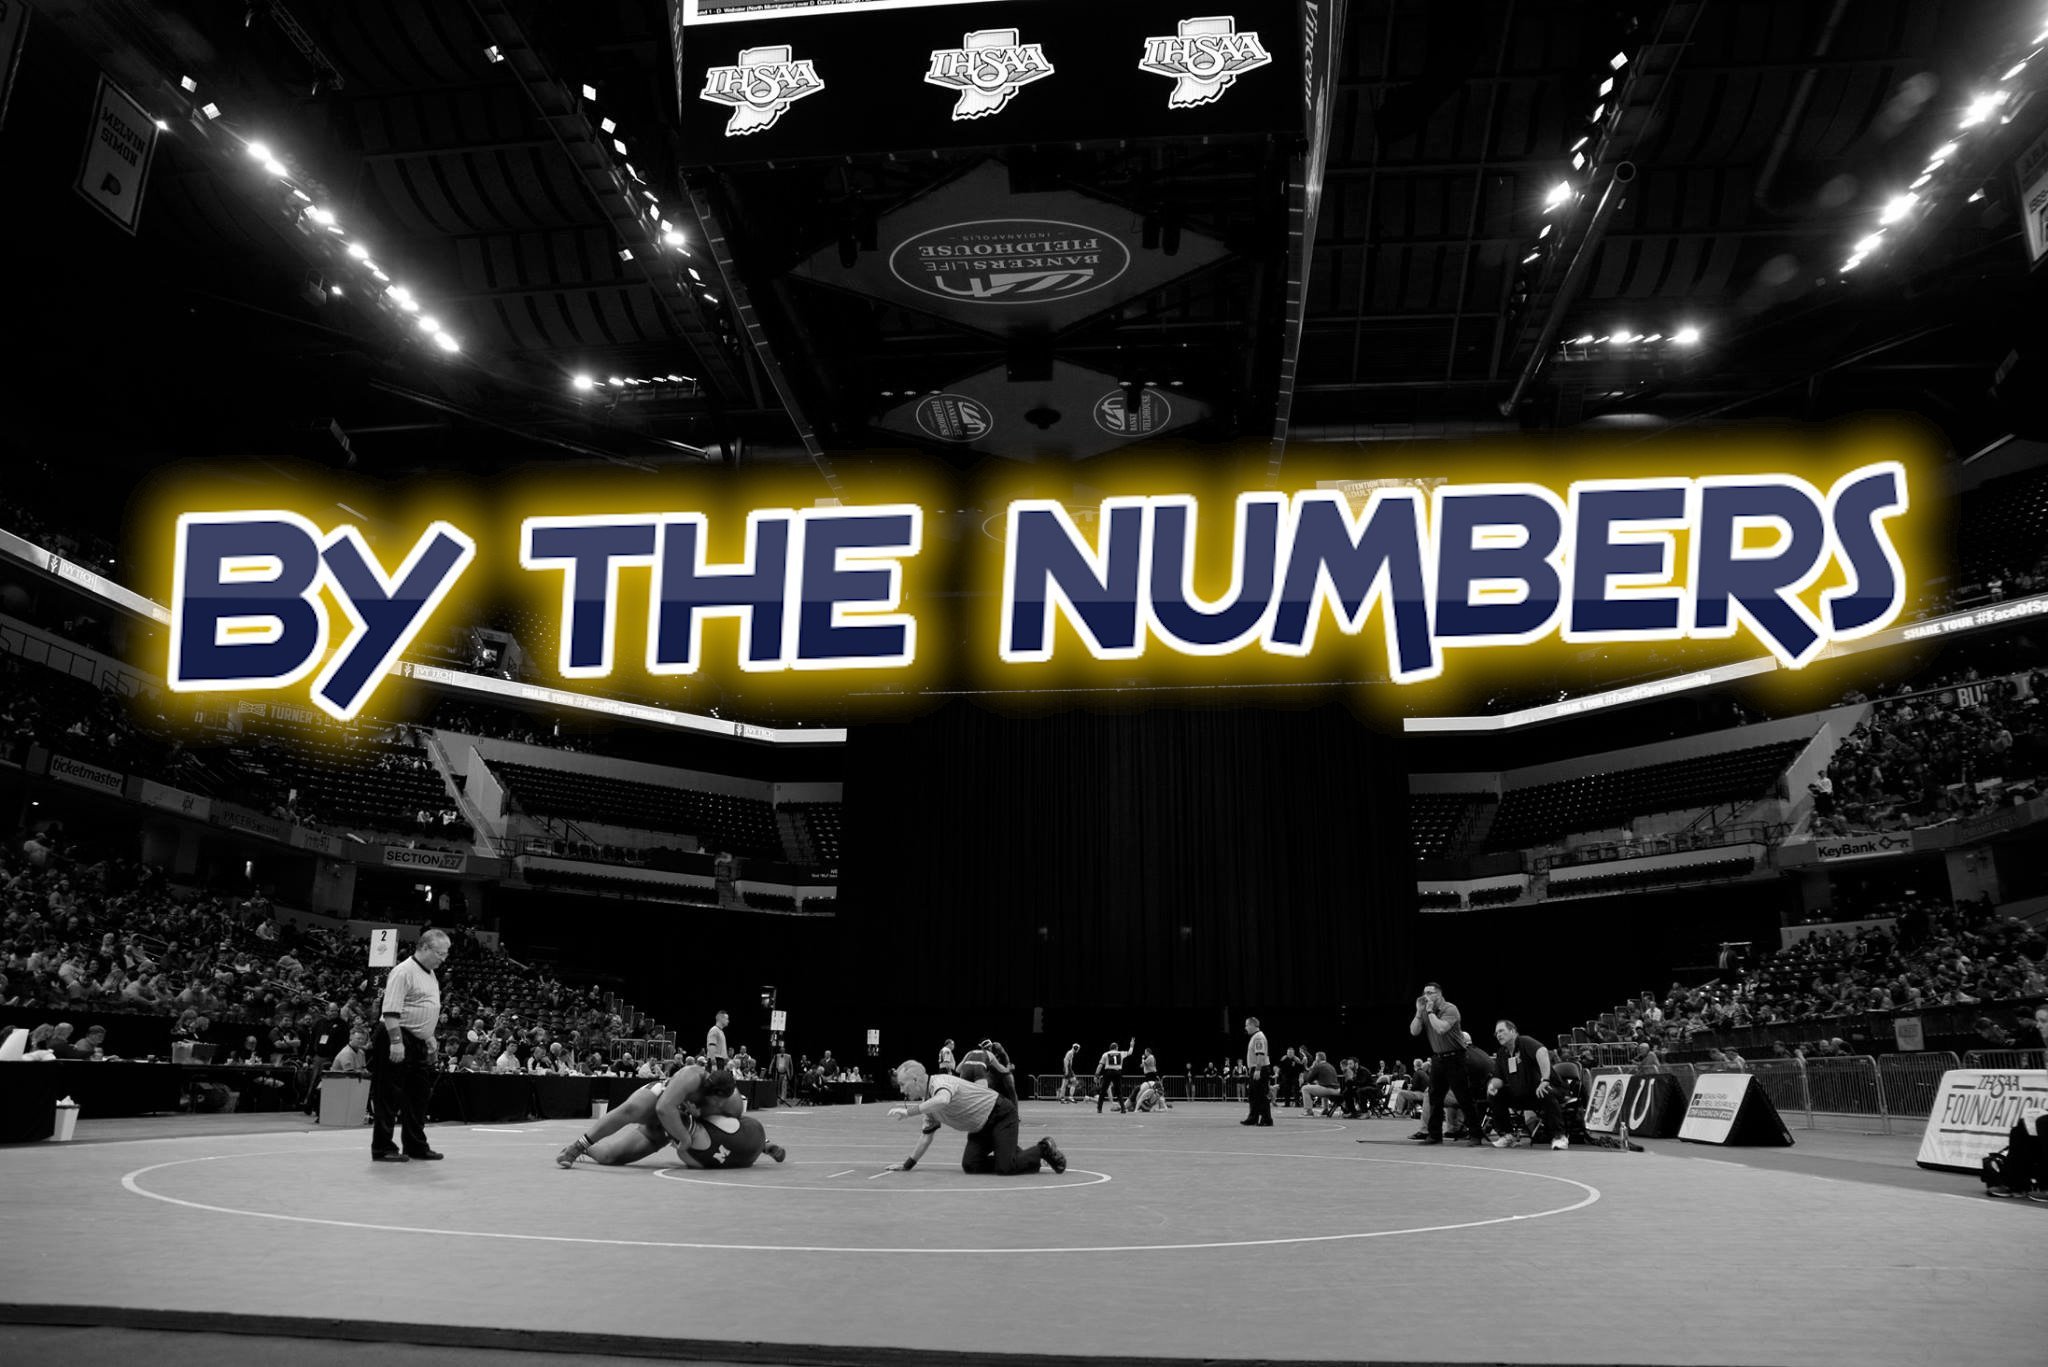 More information about "2022 State Finals by the Numbers"